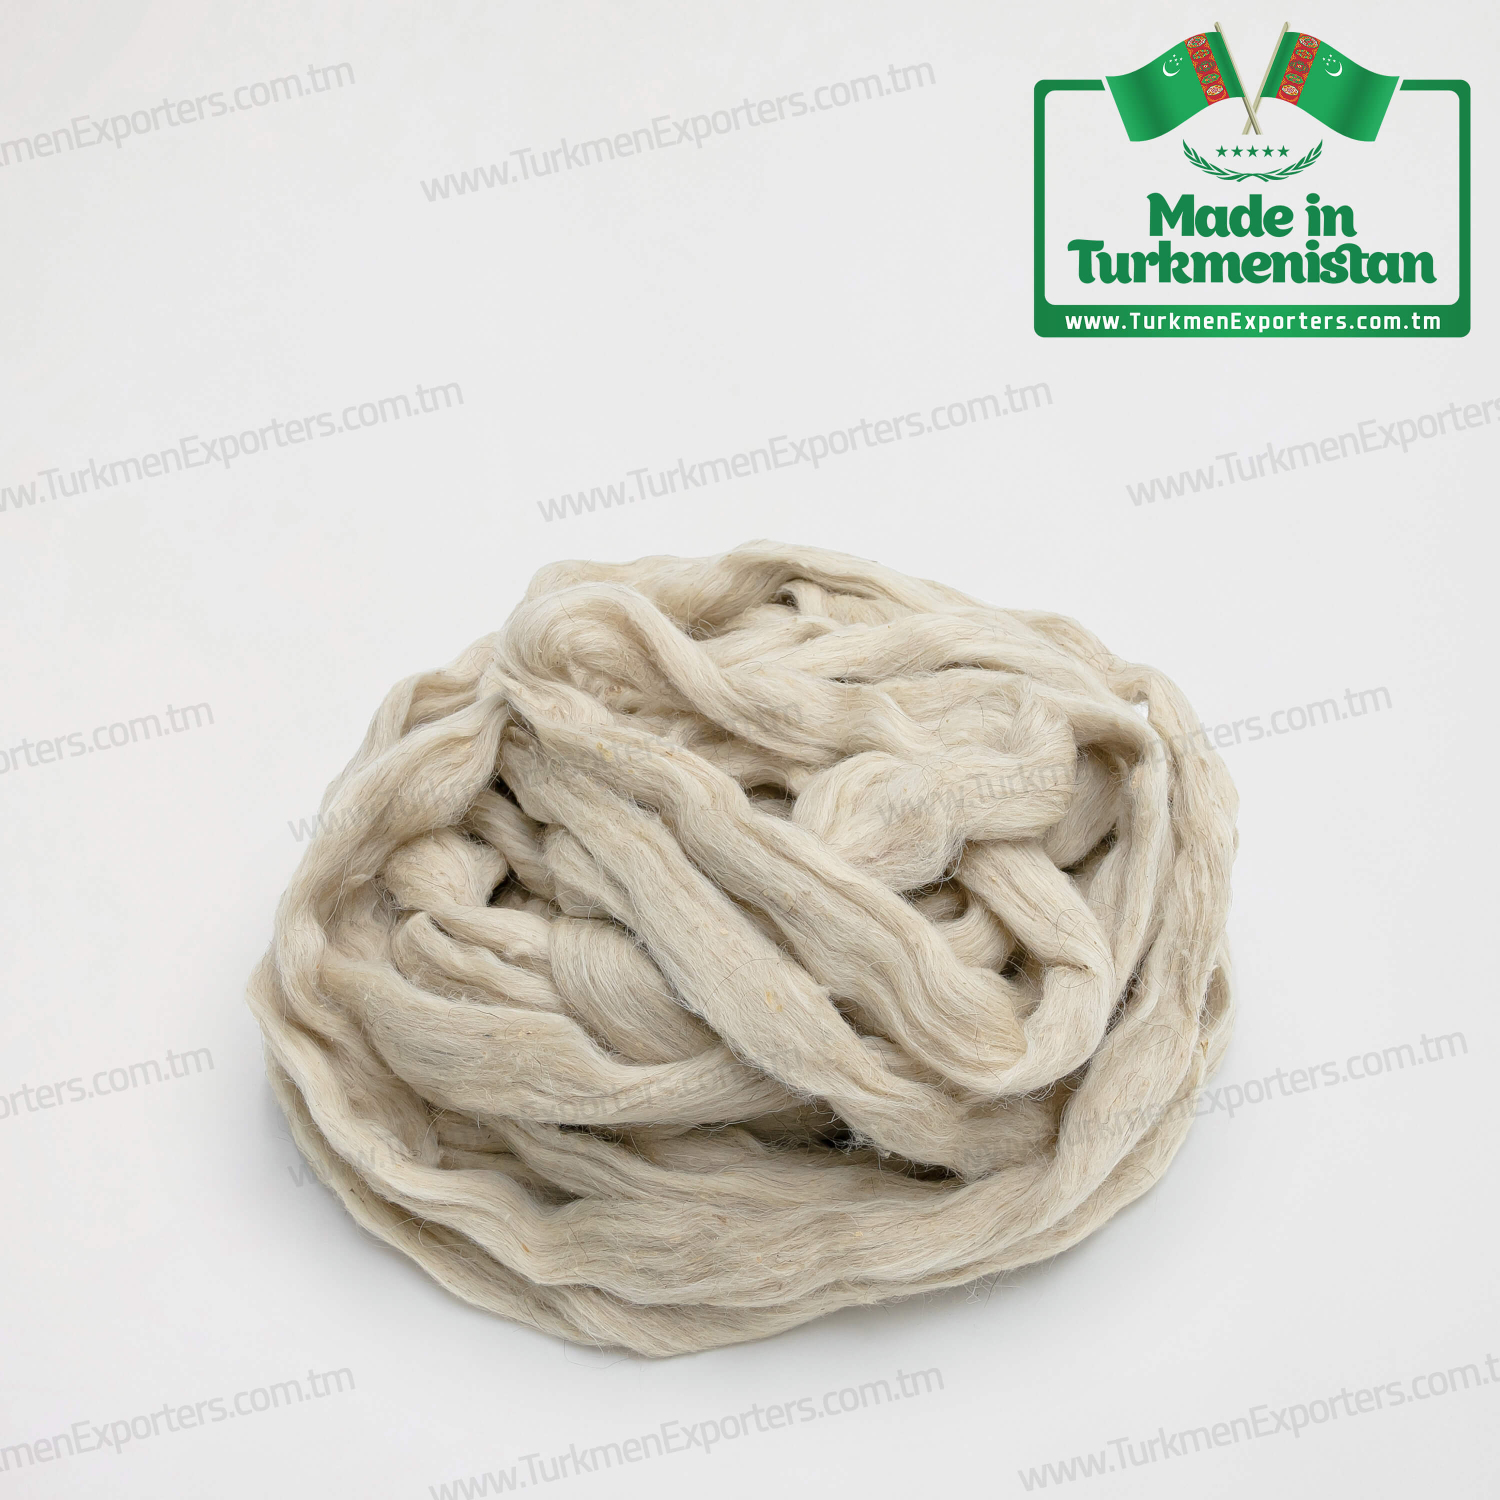 Sheep wool wholesale for export from Turkmenistan | Turkmen Export, Import & Trading Services Company